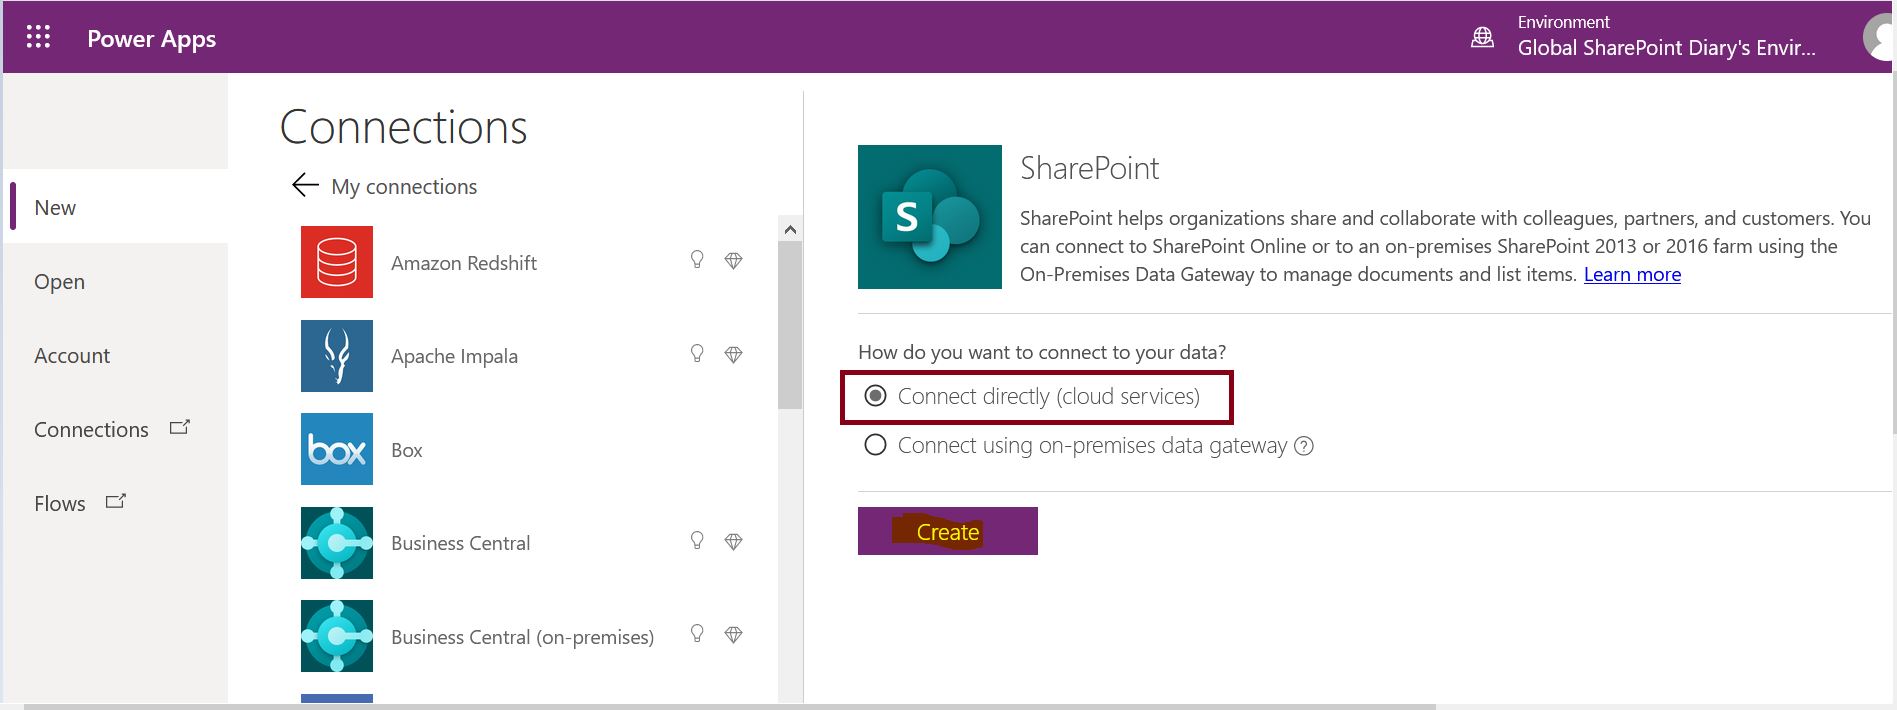 Create SharePoint data connection - Connect directly (cloud services)